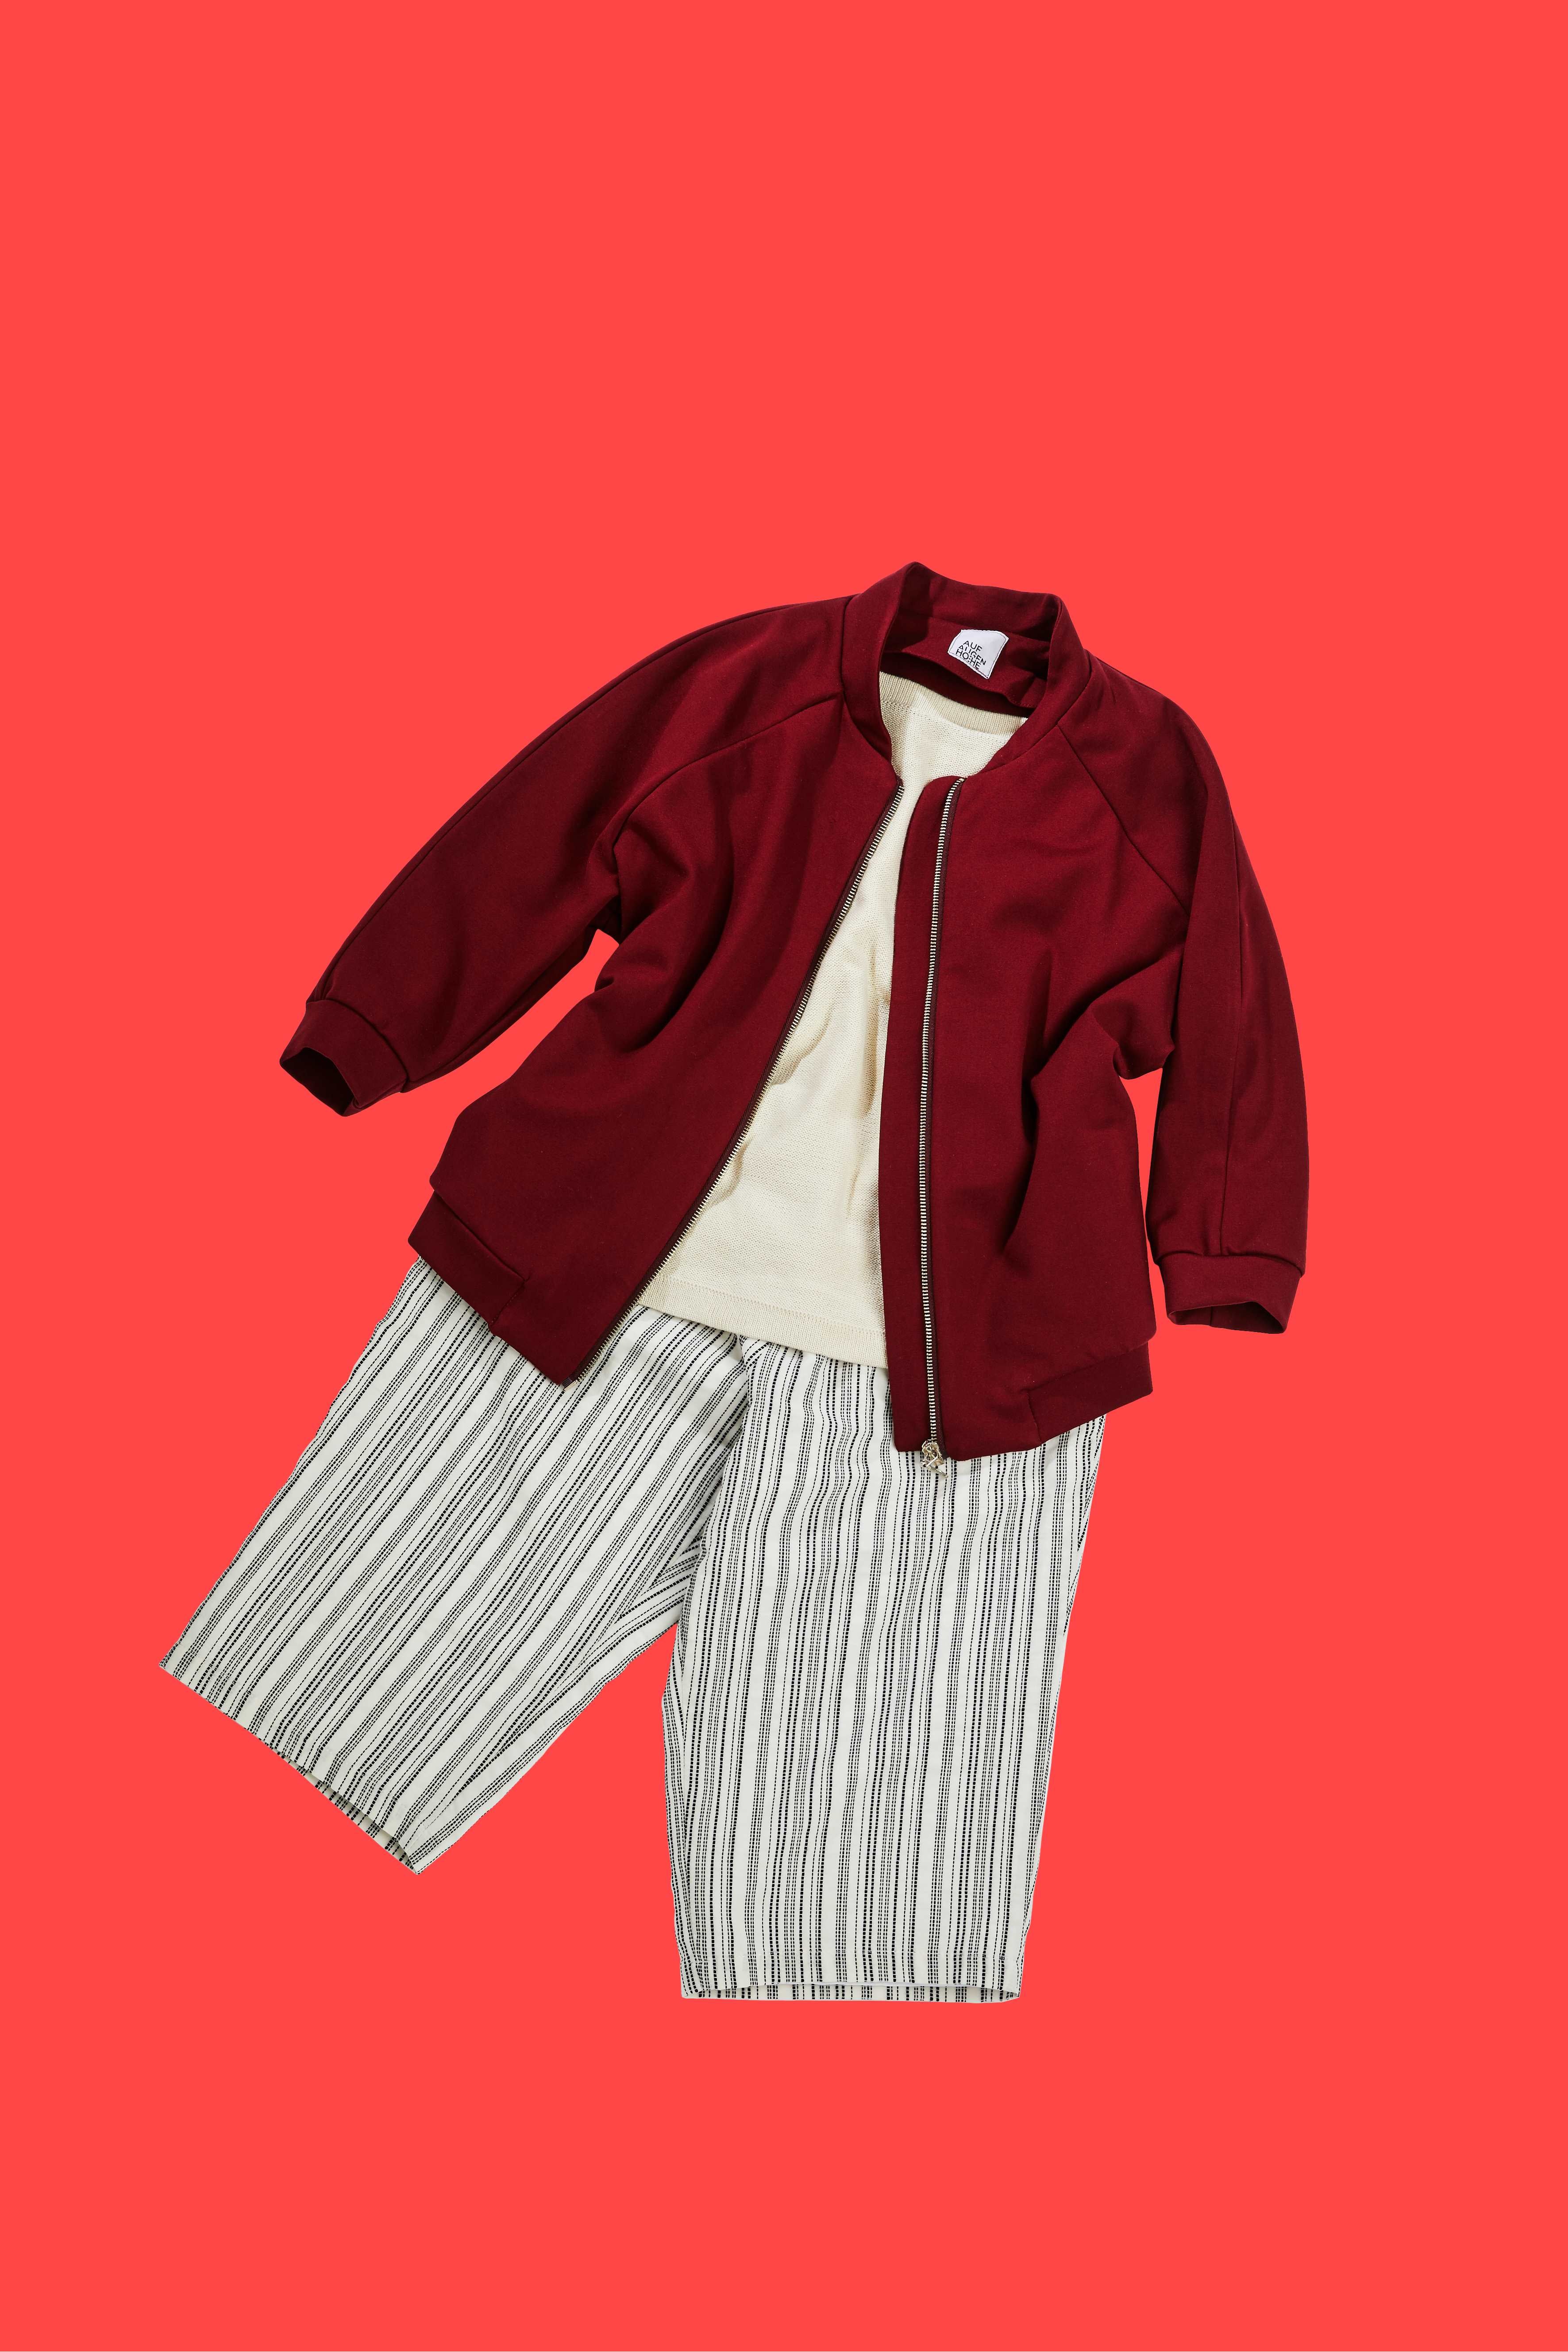 red college jacket and white outfit on red background